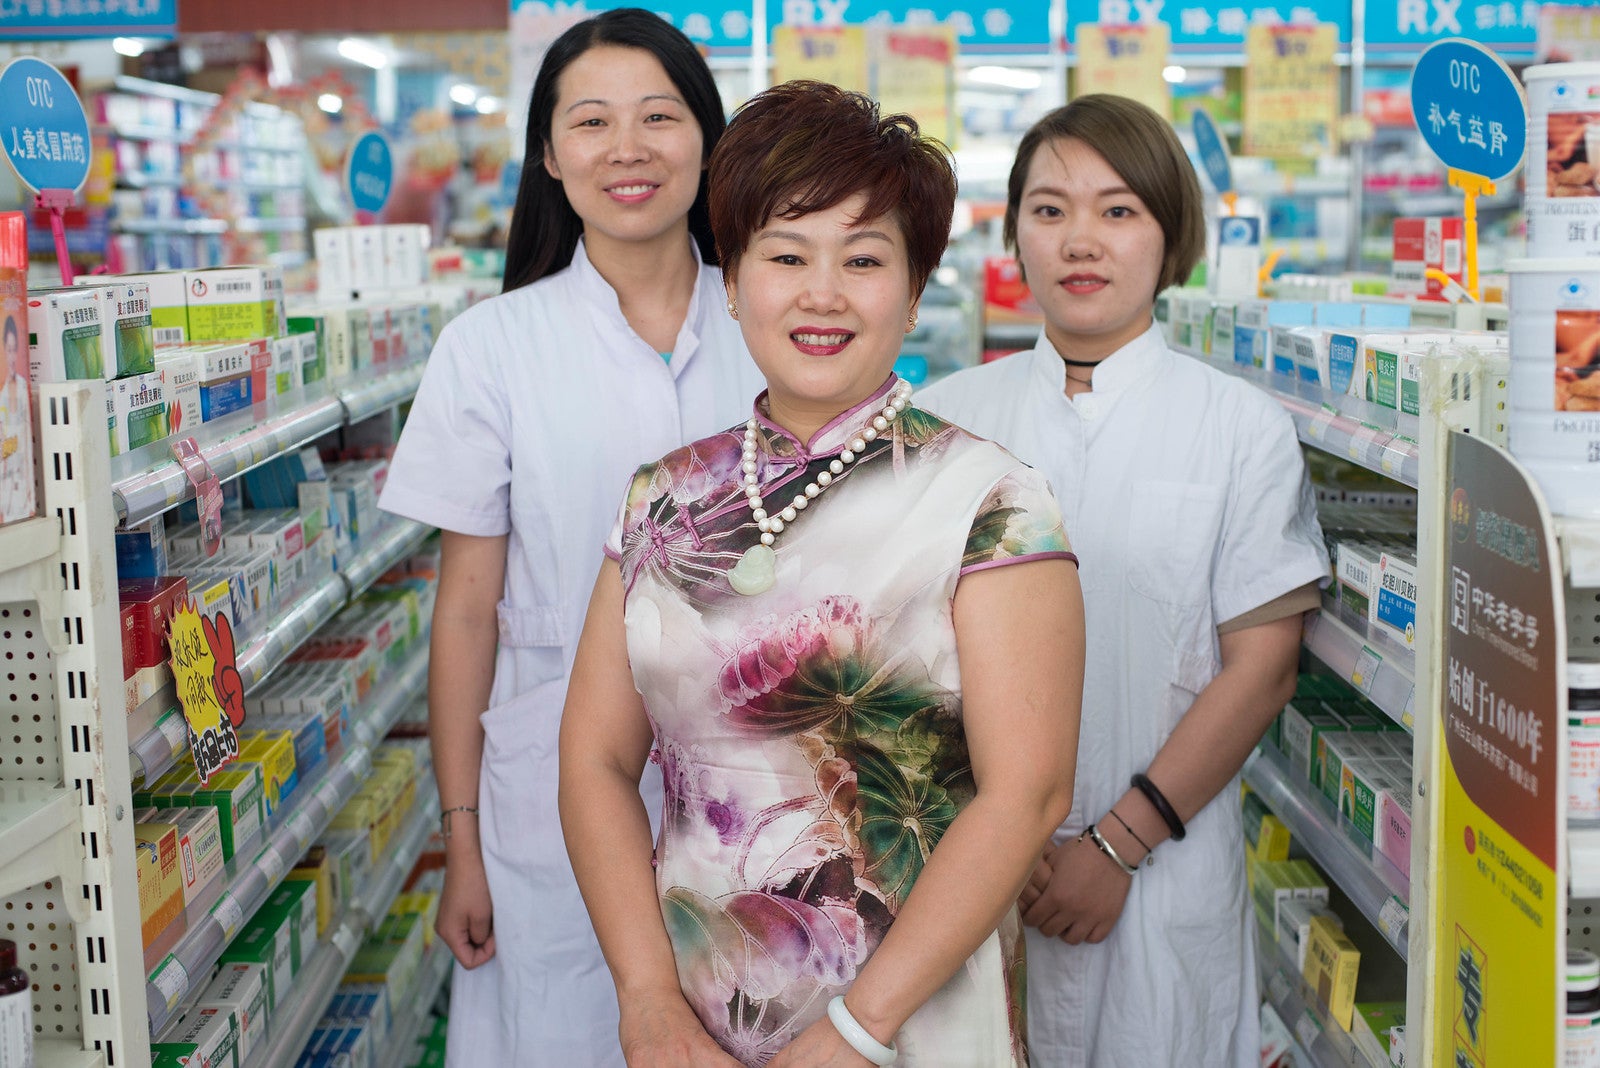 The staff of a drug store in Louyang, China. Photo: Iwan Bagus, International Finance Corporation